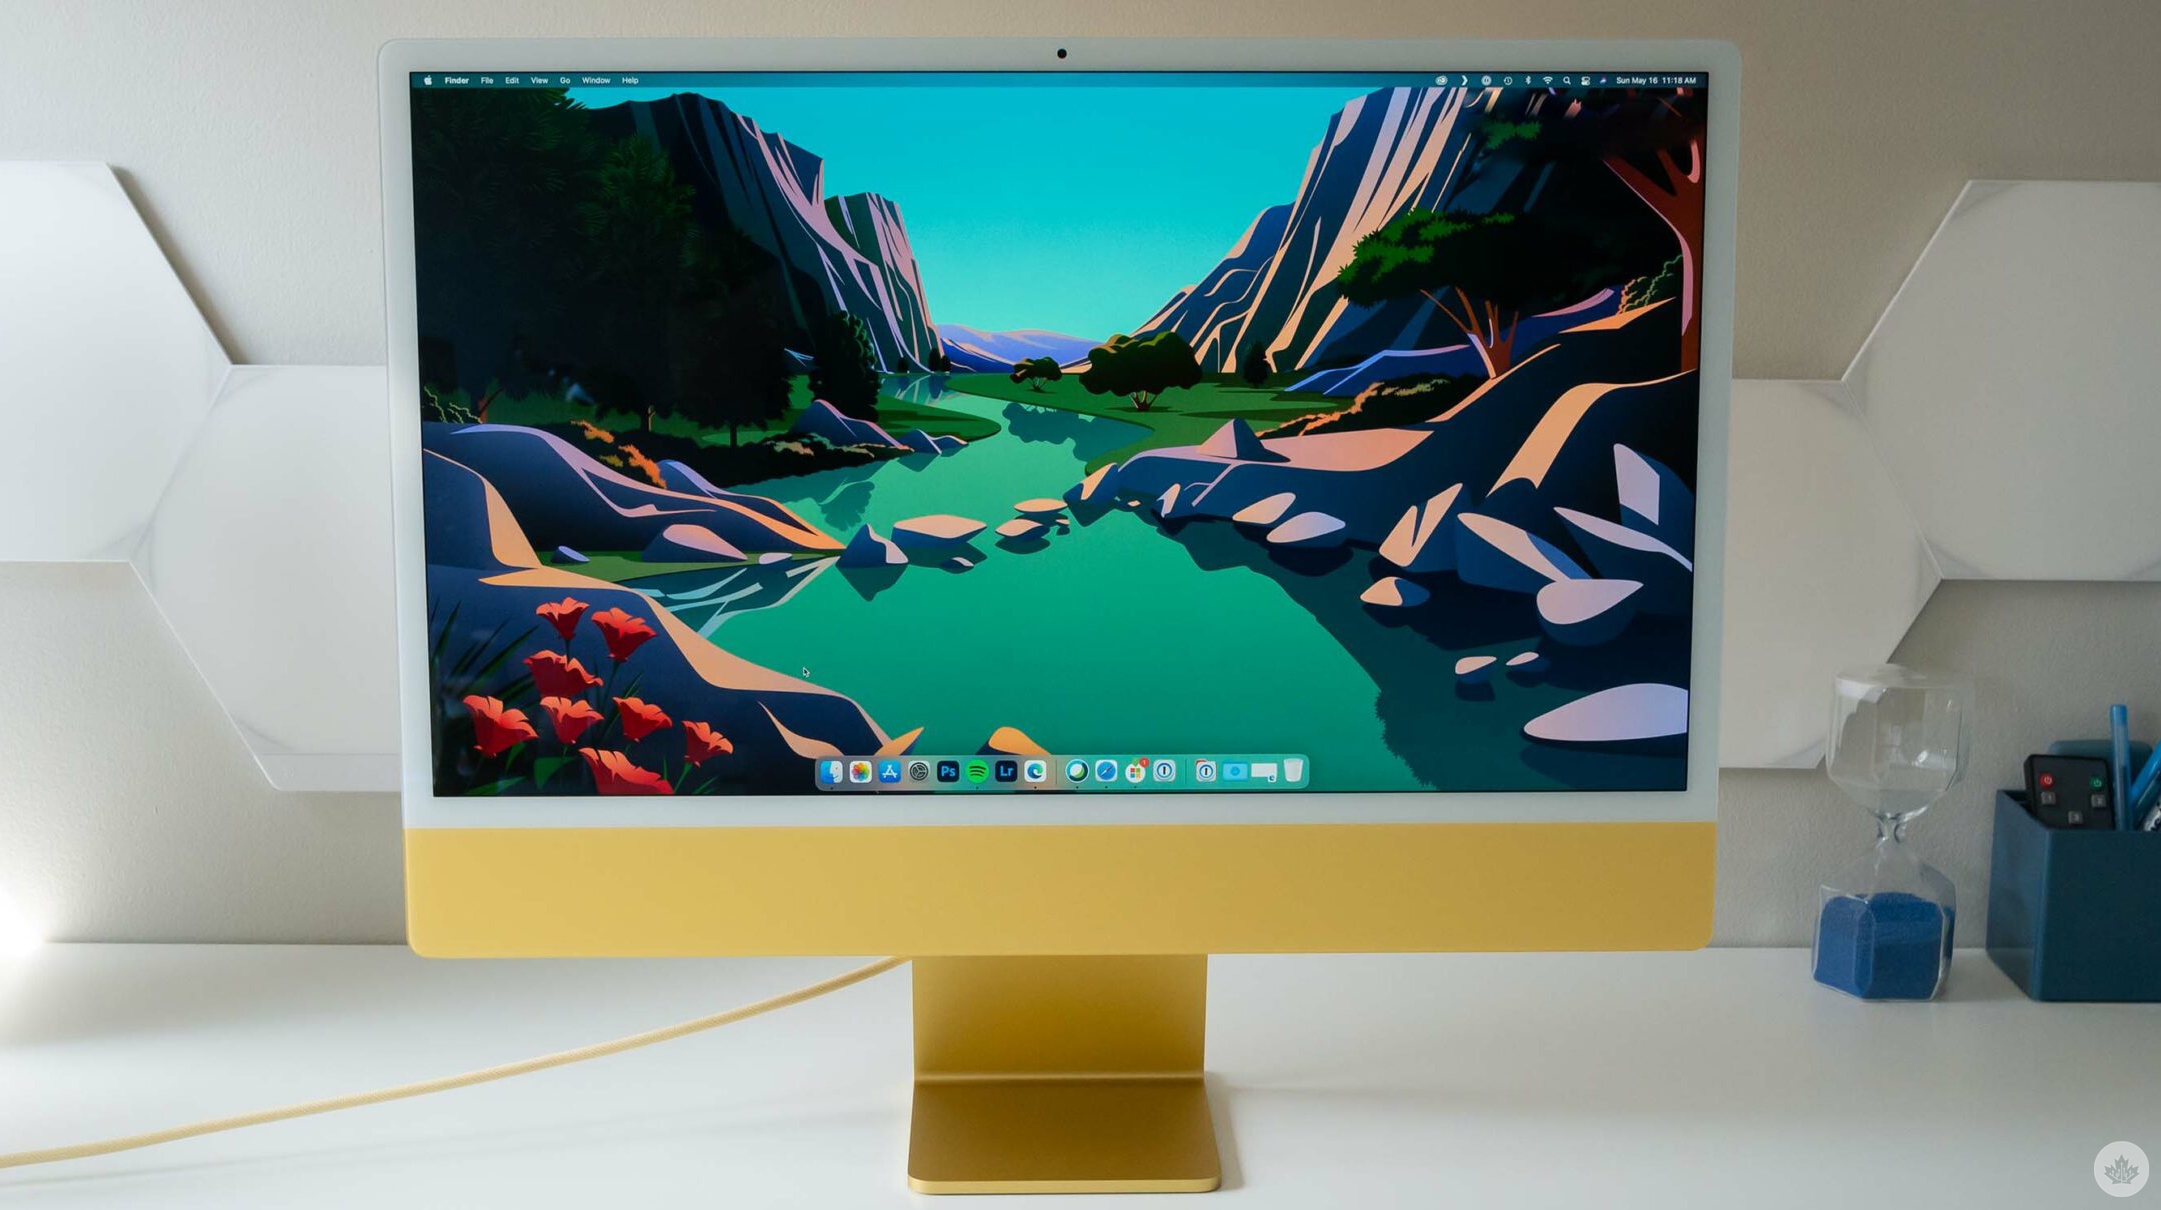 Apple adds self-repair support to recent iMacs